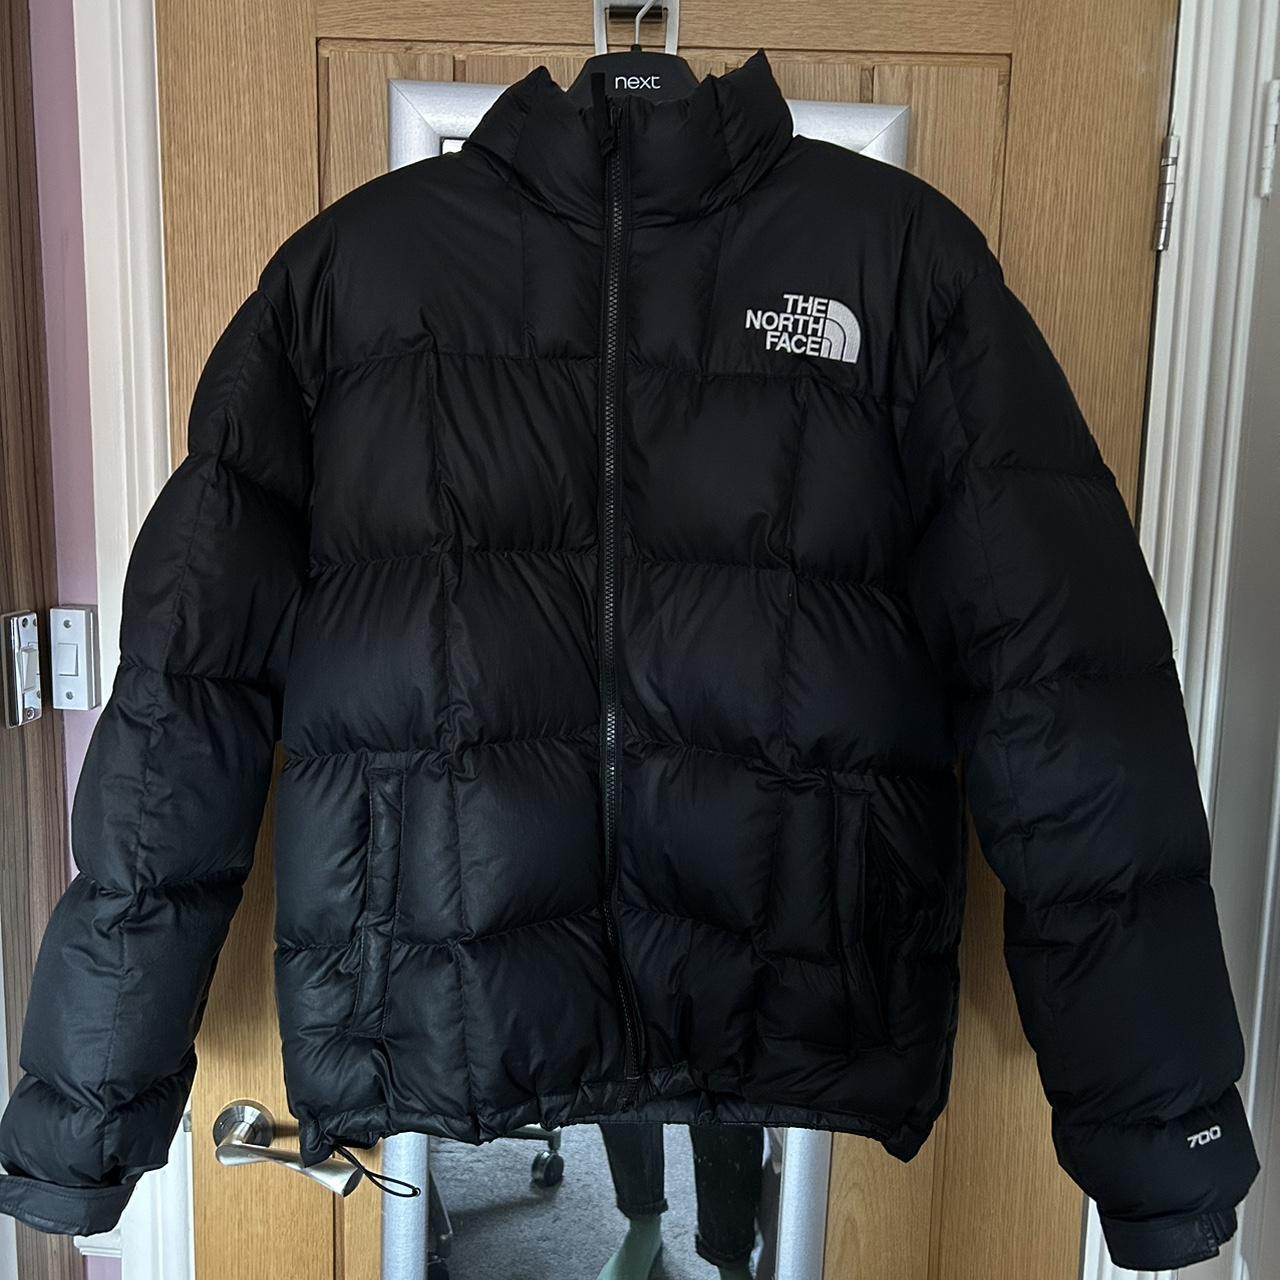 North face puffer jacket Excellent condition No... - Depop